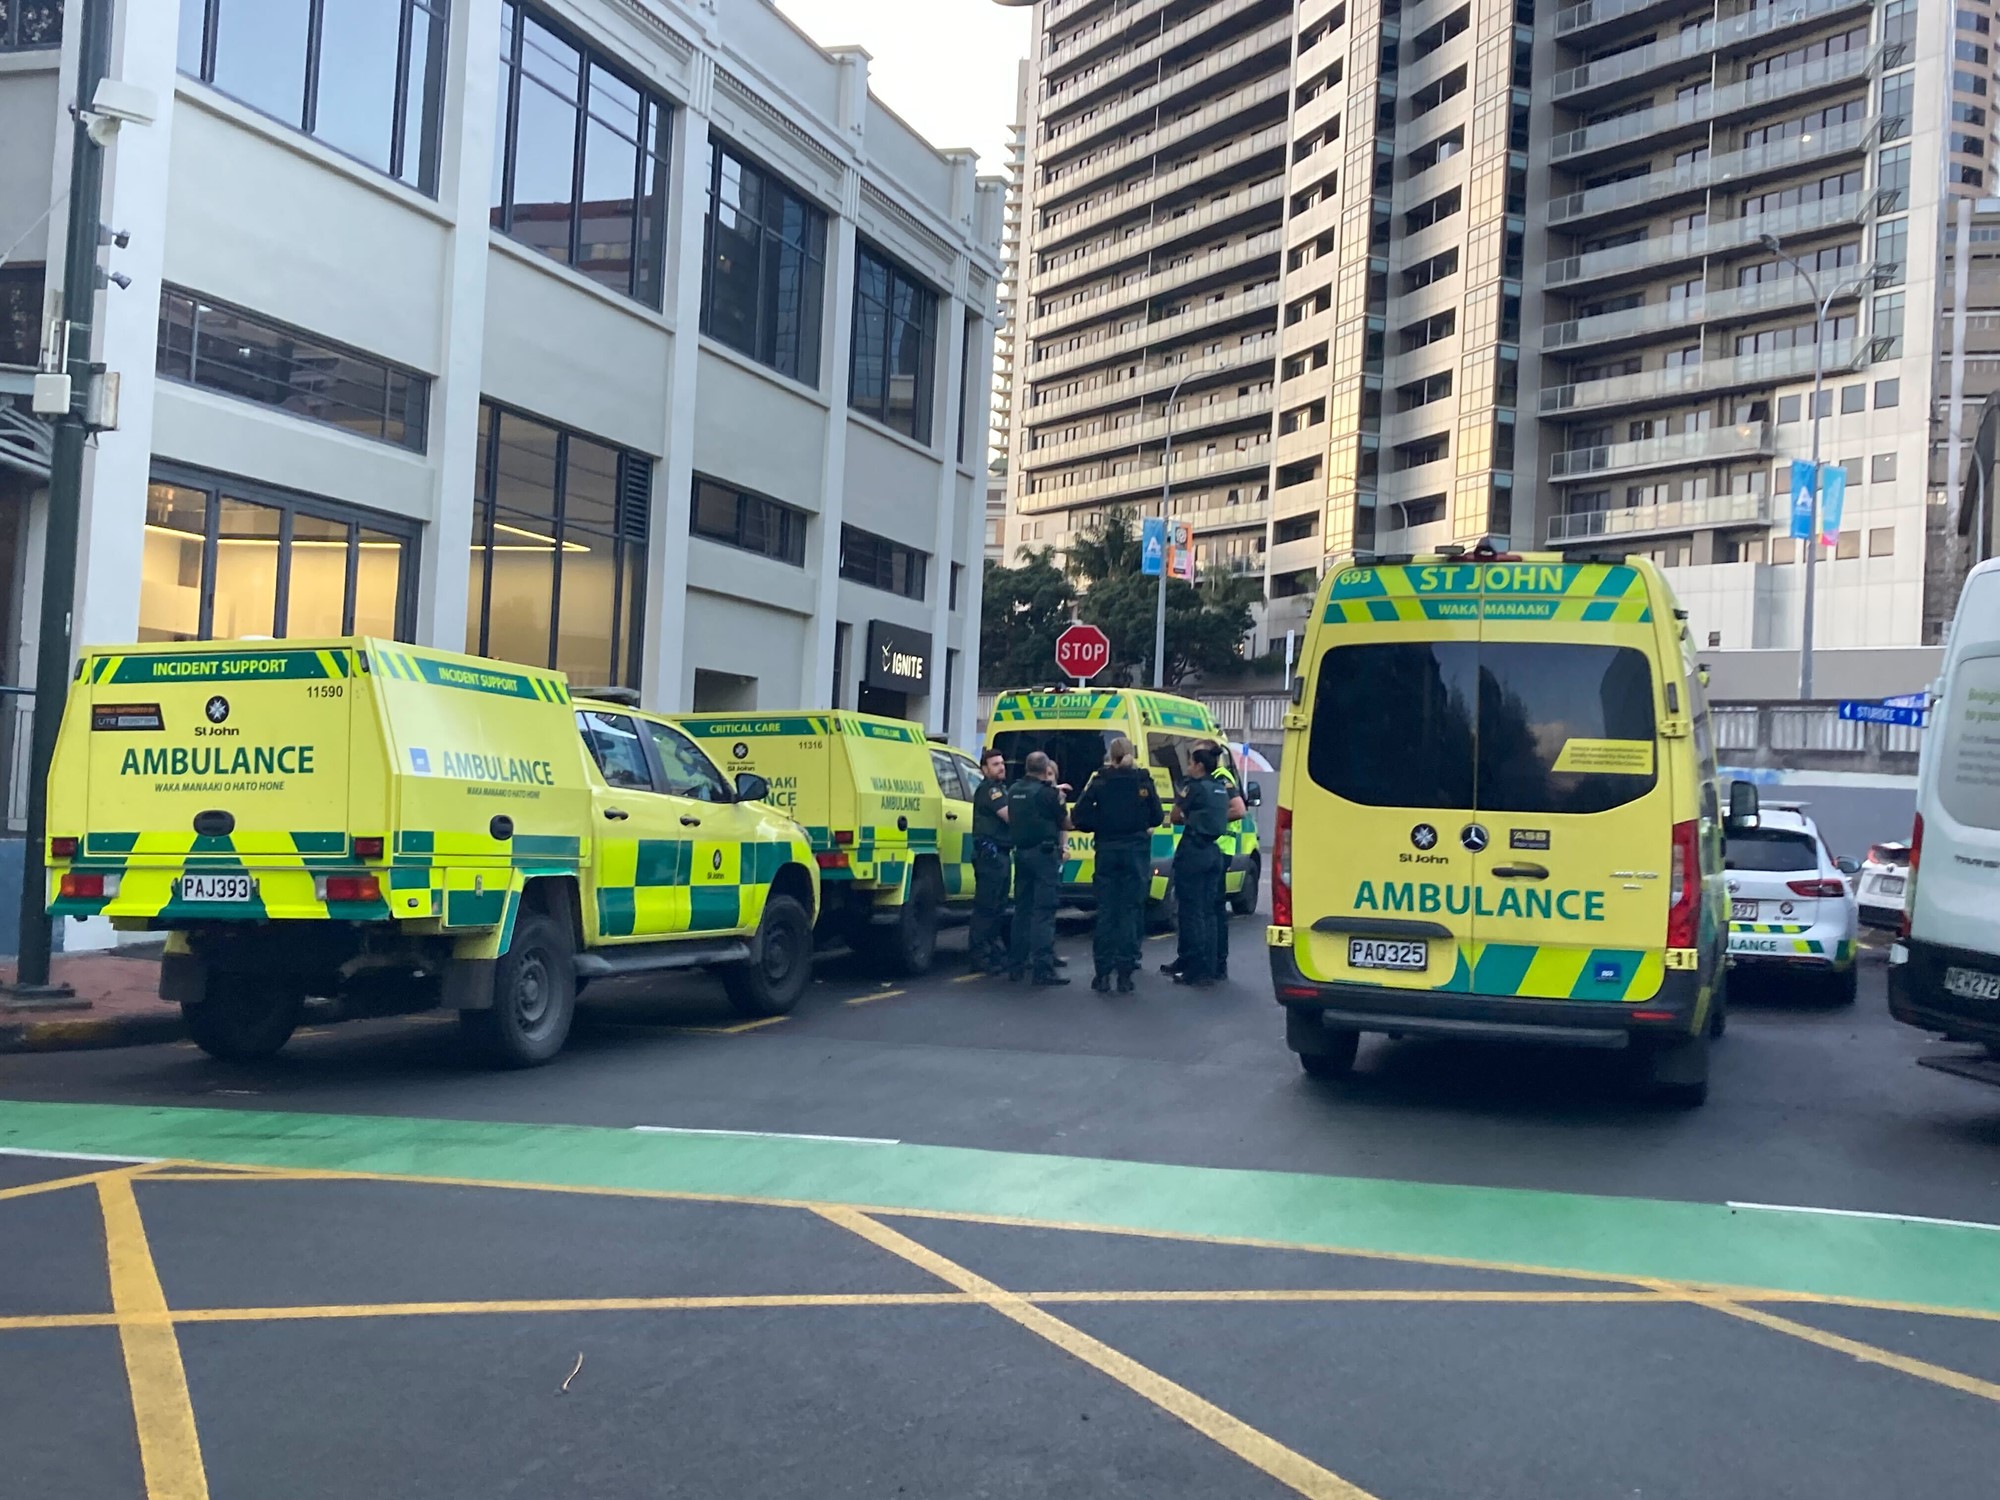 Live: 'Stay indoors, avoid area' - armed police respond to Auckland CBD  incident